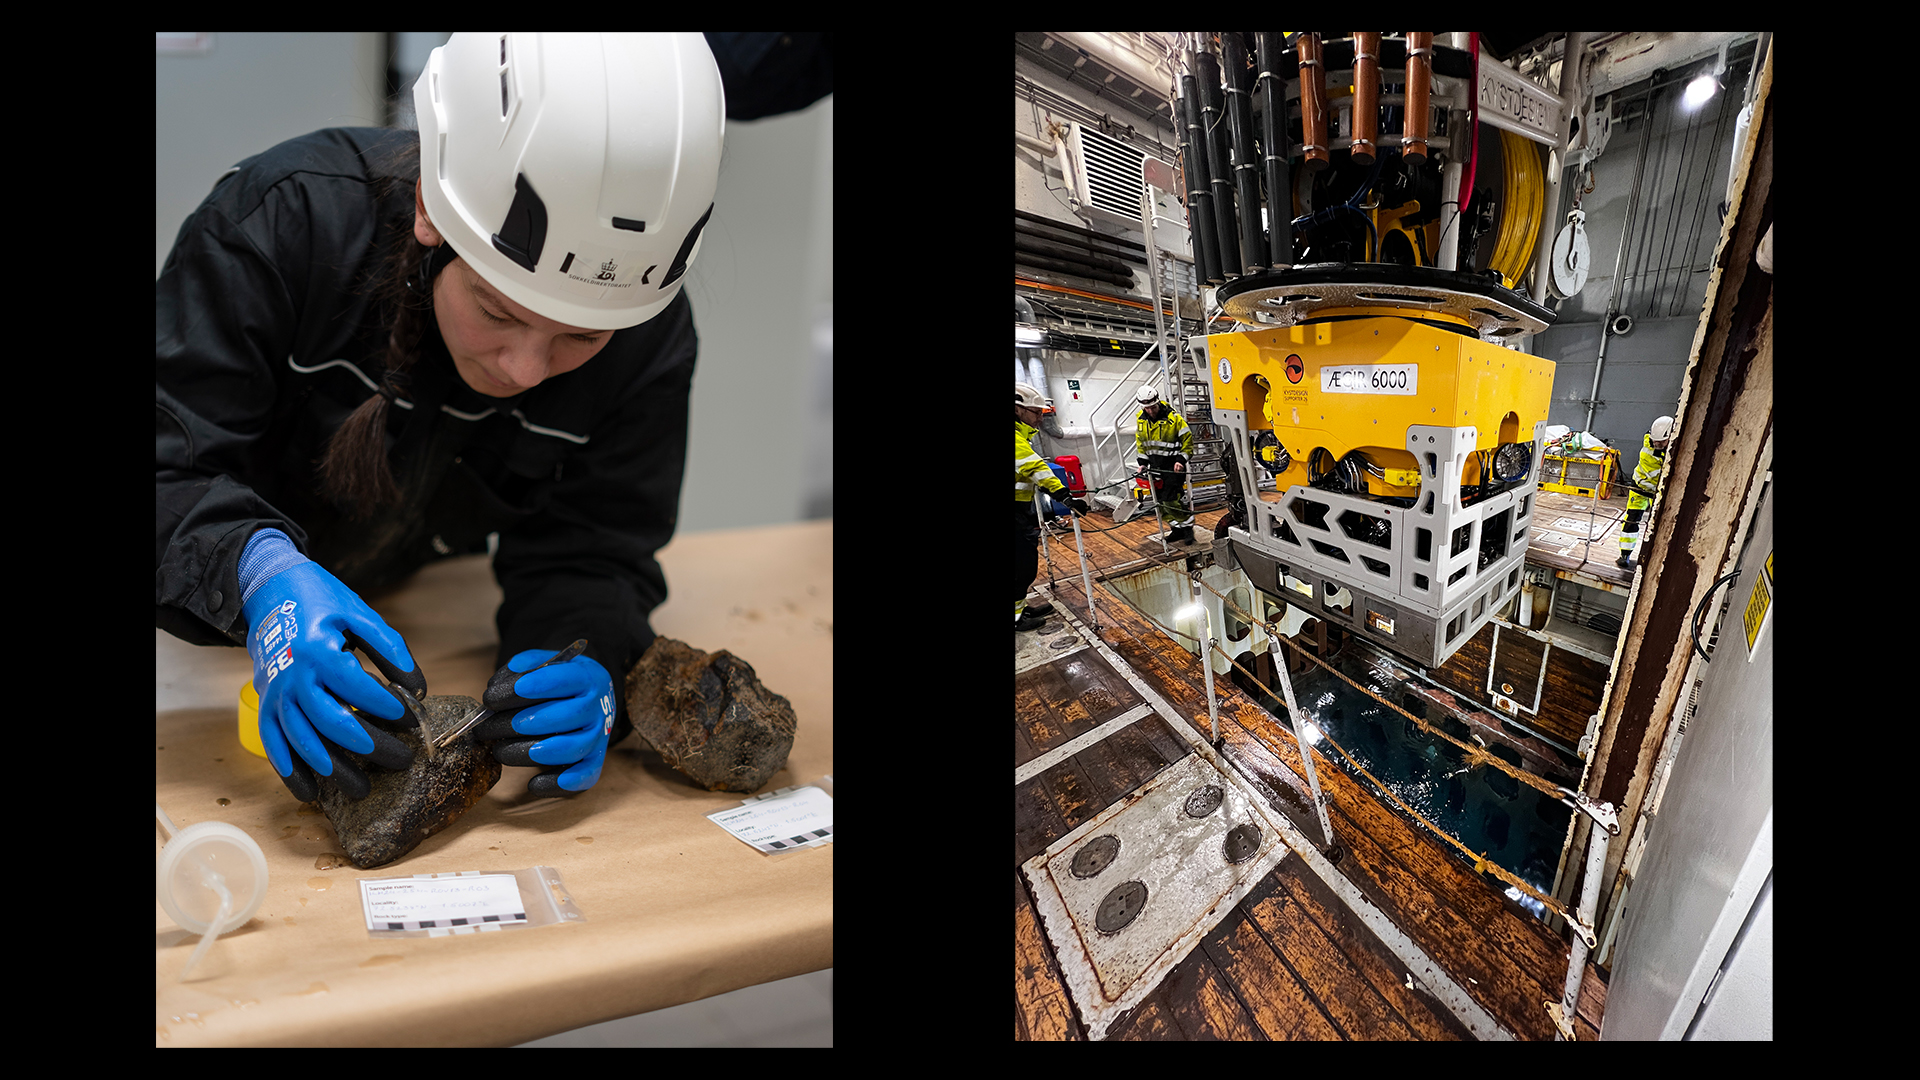 Rosalyn Fredriksen, environmental advisor for the Norwegian Offshore Directorate, looks for biological traces in a sample extracted from 3000 metres below sea level. On the right, the ROV that was used on the recent seabed mapping. (Photo: Jørgen Vadla/the Norwegian Offshore Directorate)